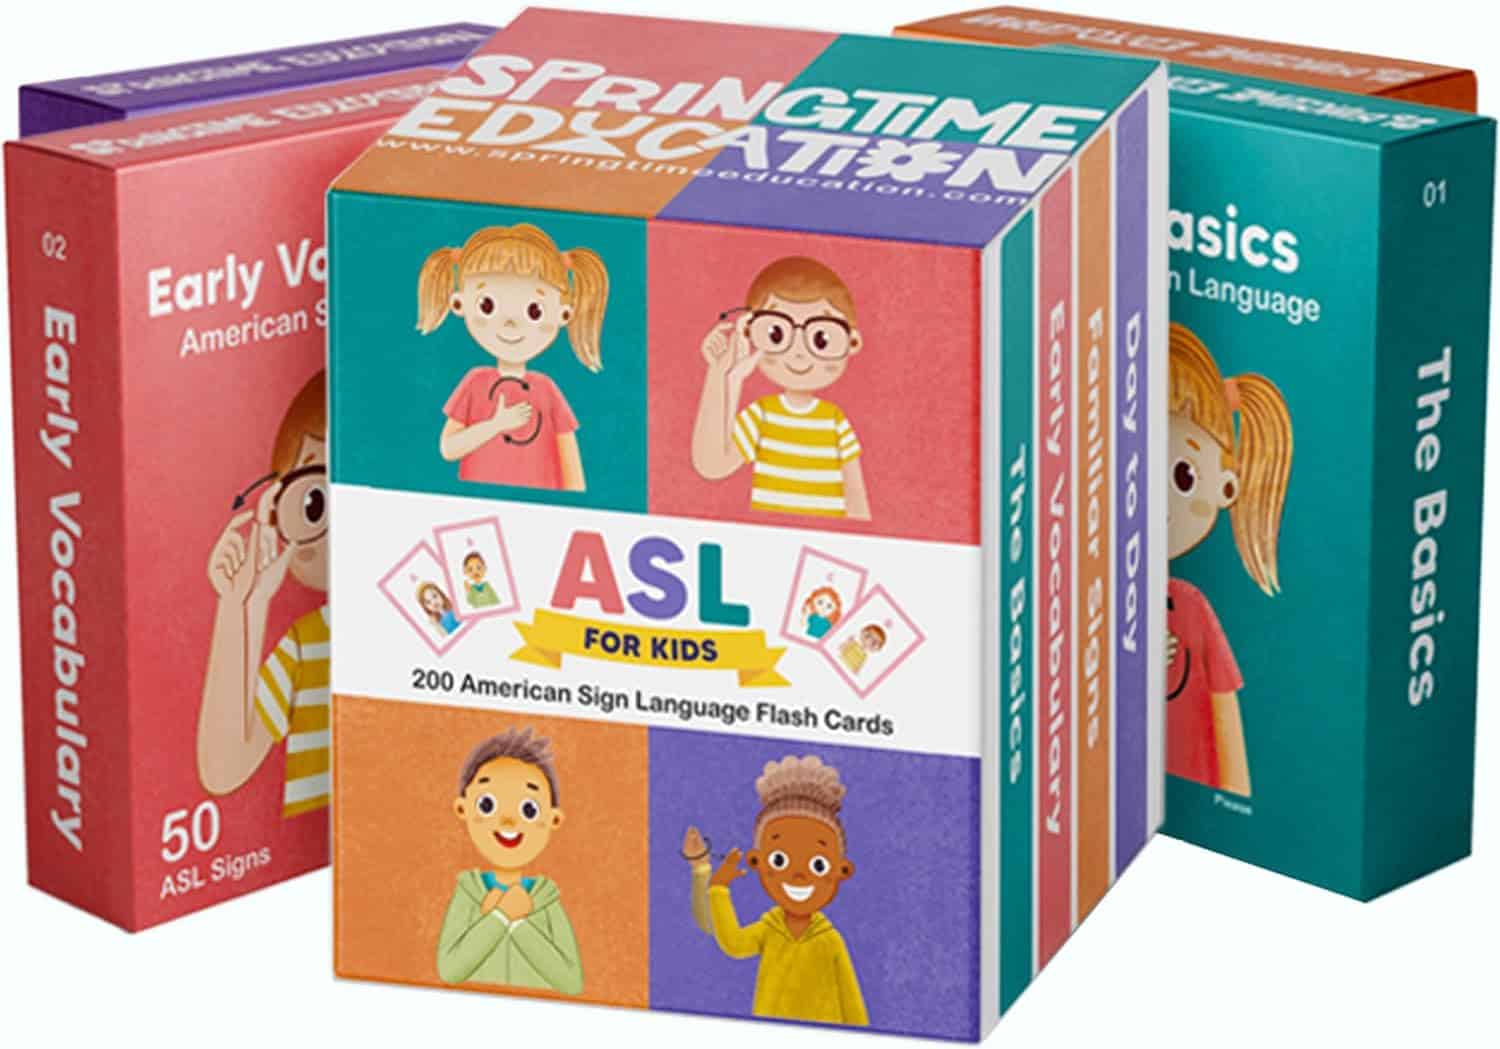 ASL Kids Flash Cards - 200 American Sign Language Cards for Children, Toddlers and Beginners